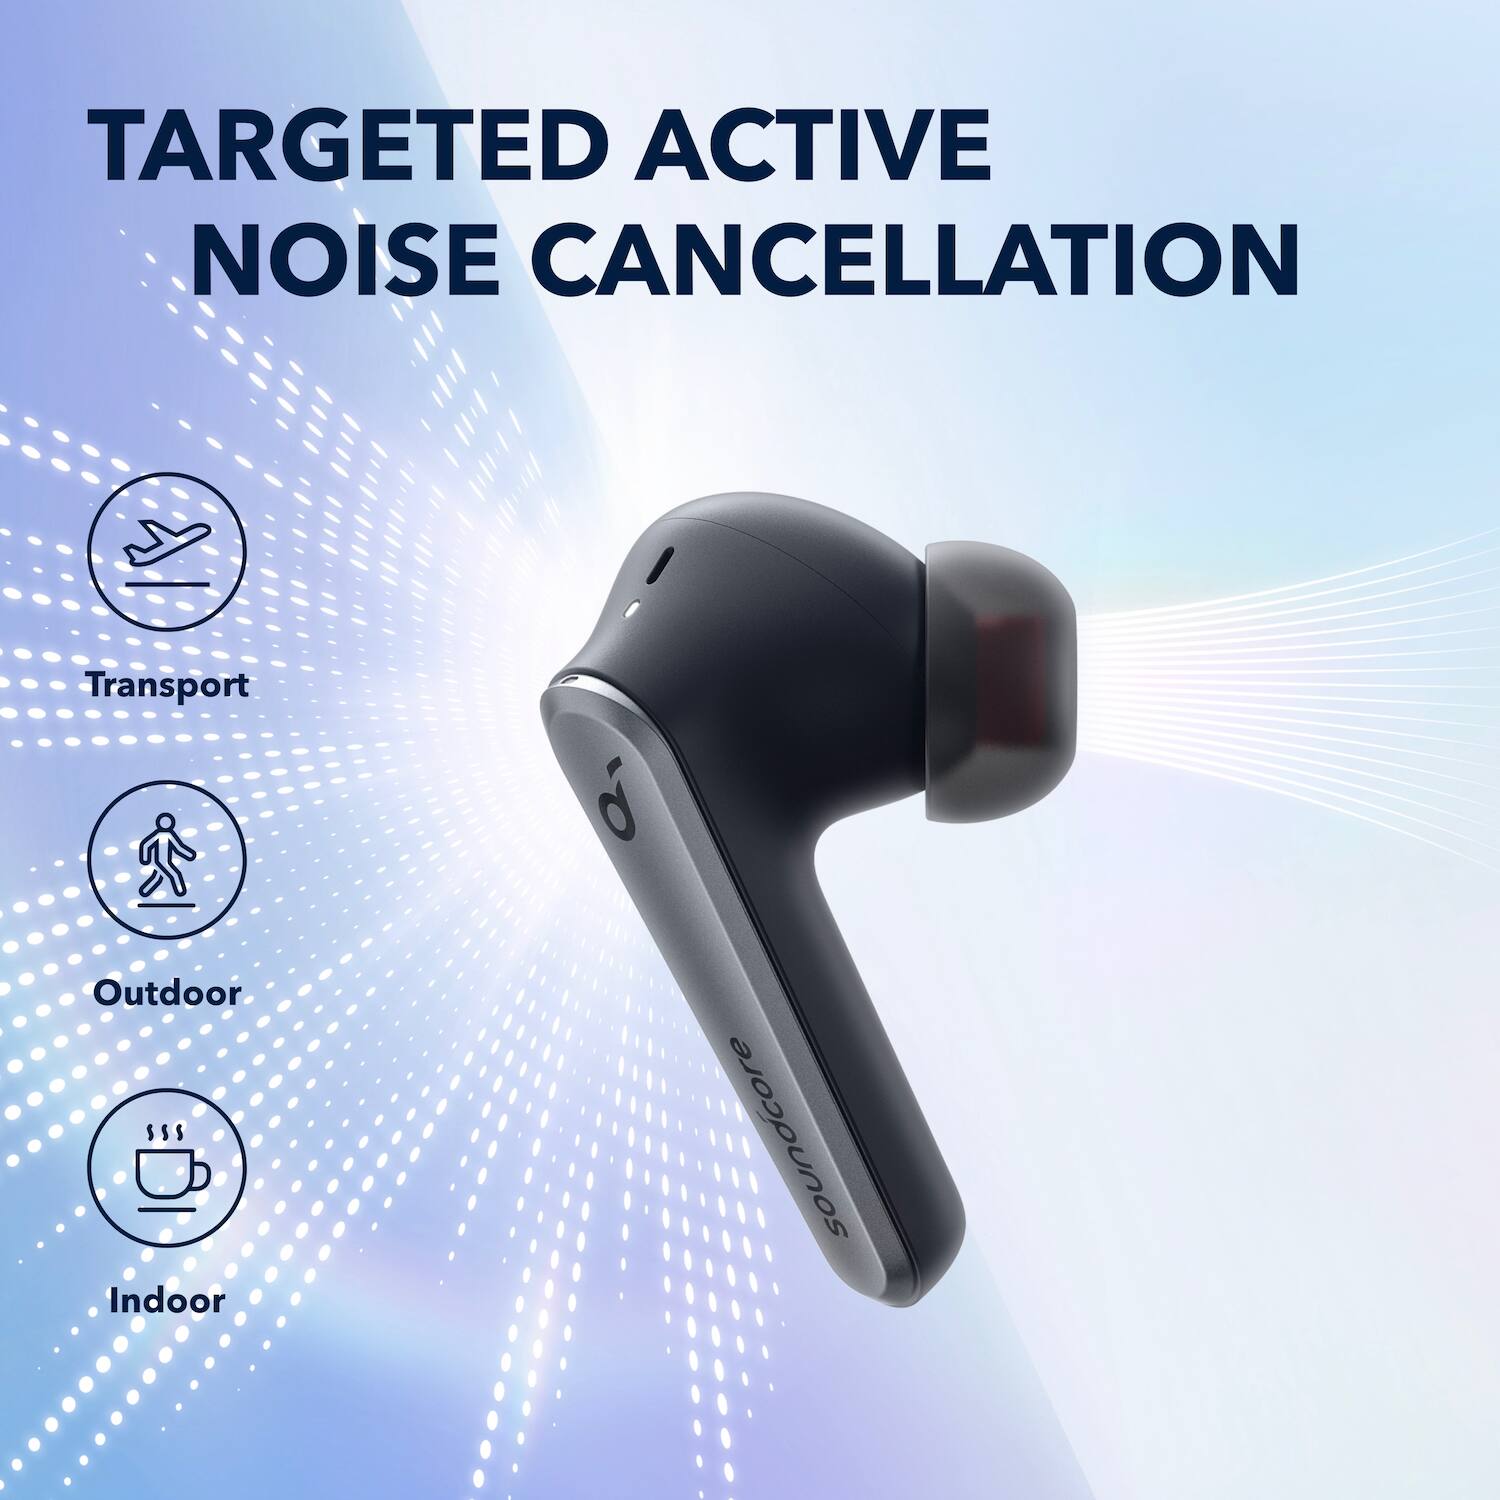 ($40 off) Anker - Soundcore Liberty Air 2 Pro Earbuds Hi-Resolution True Wireless Noise Cancelling In-Ear Headphones - All Colors $89.99